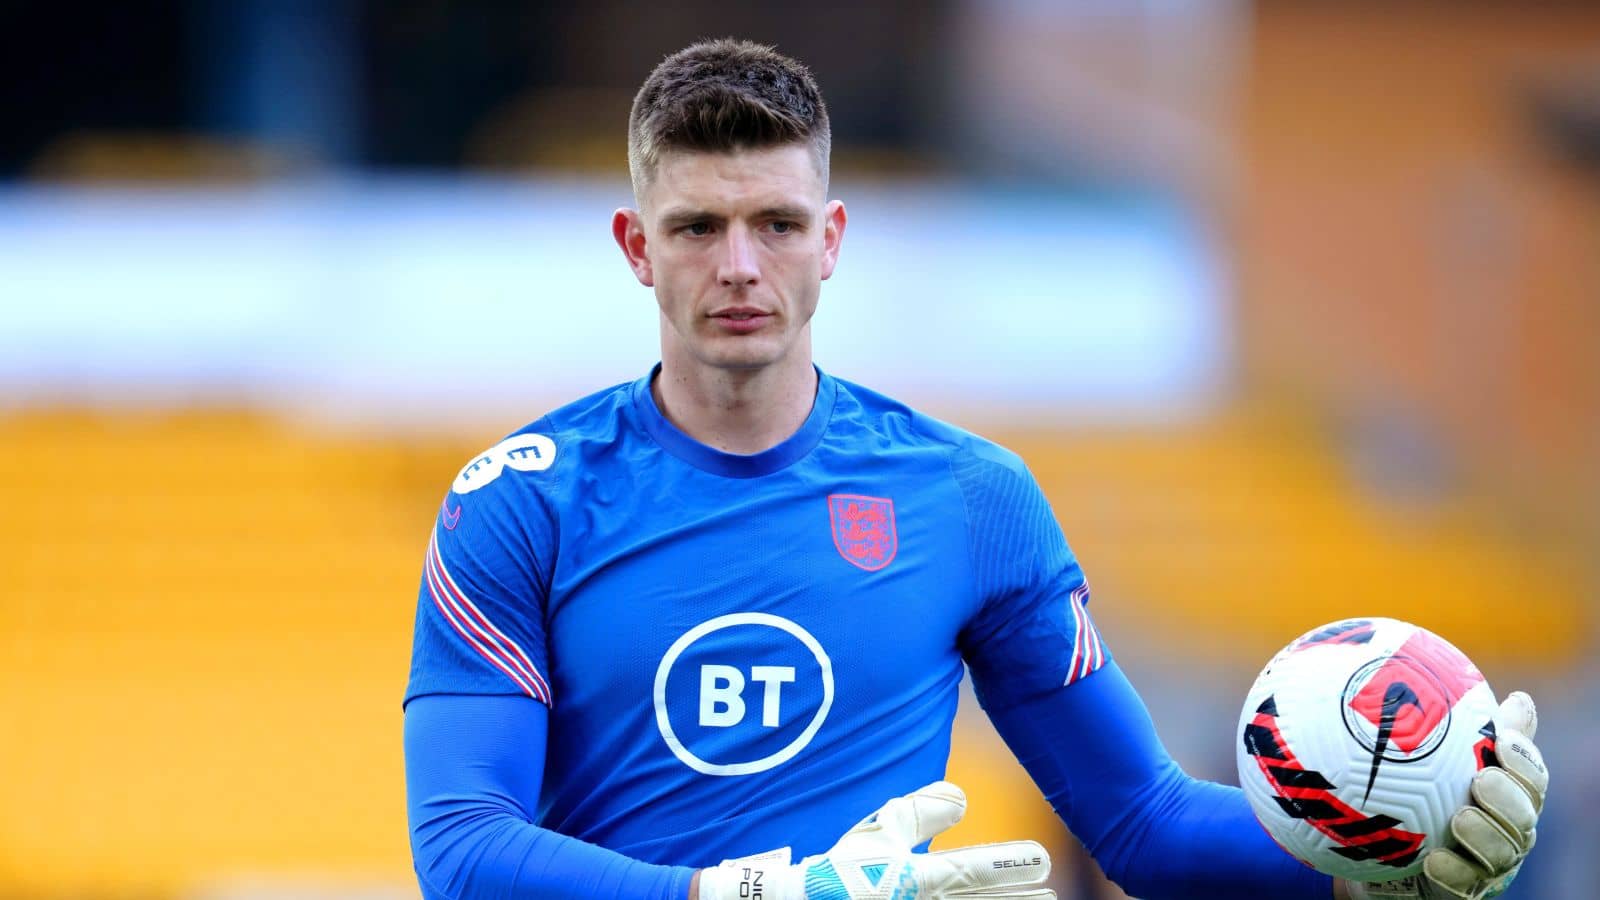 Newcastle transfer news: Nick Pope a target with Magpies confident of ironing out weakness